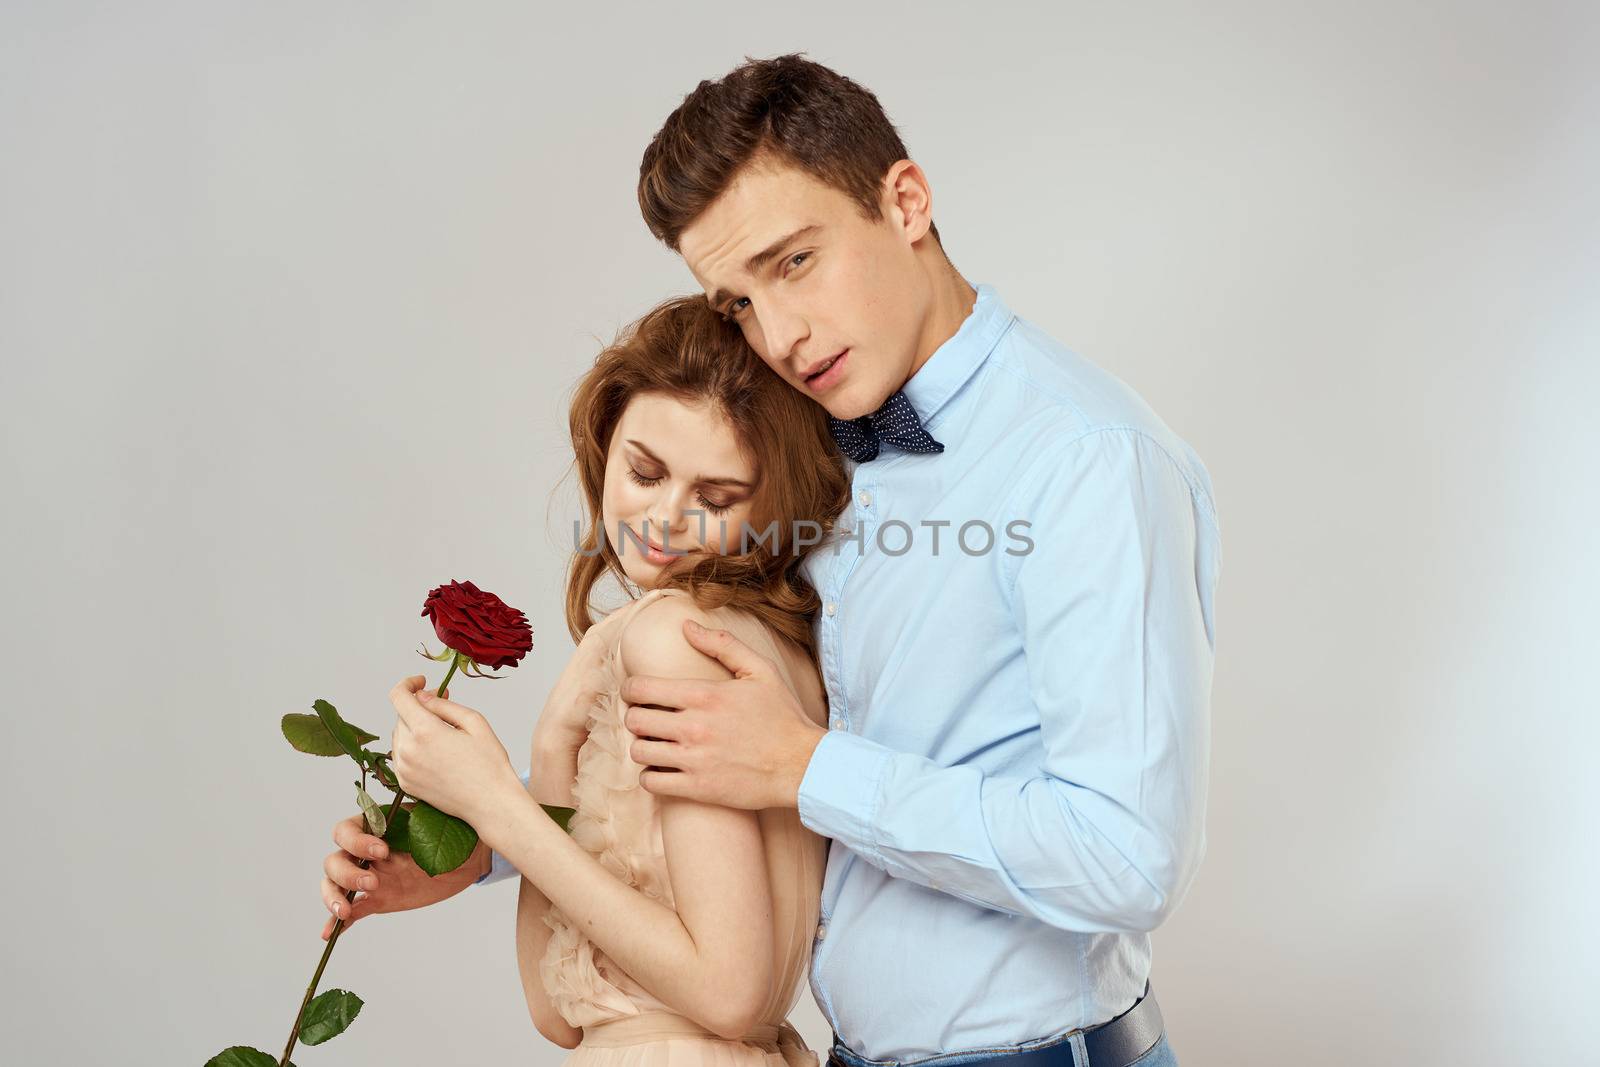 man giving woman roses relationship charm lifestyle embrace lifestyle by SHOTPRIME